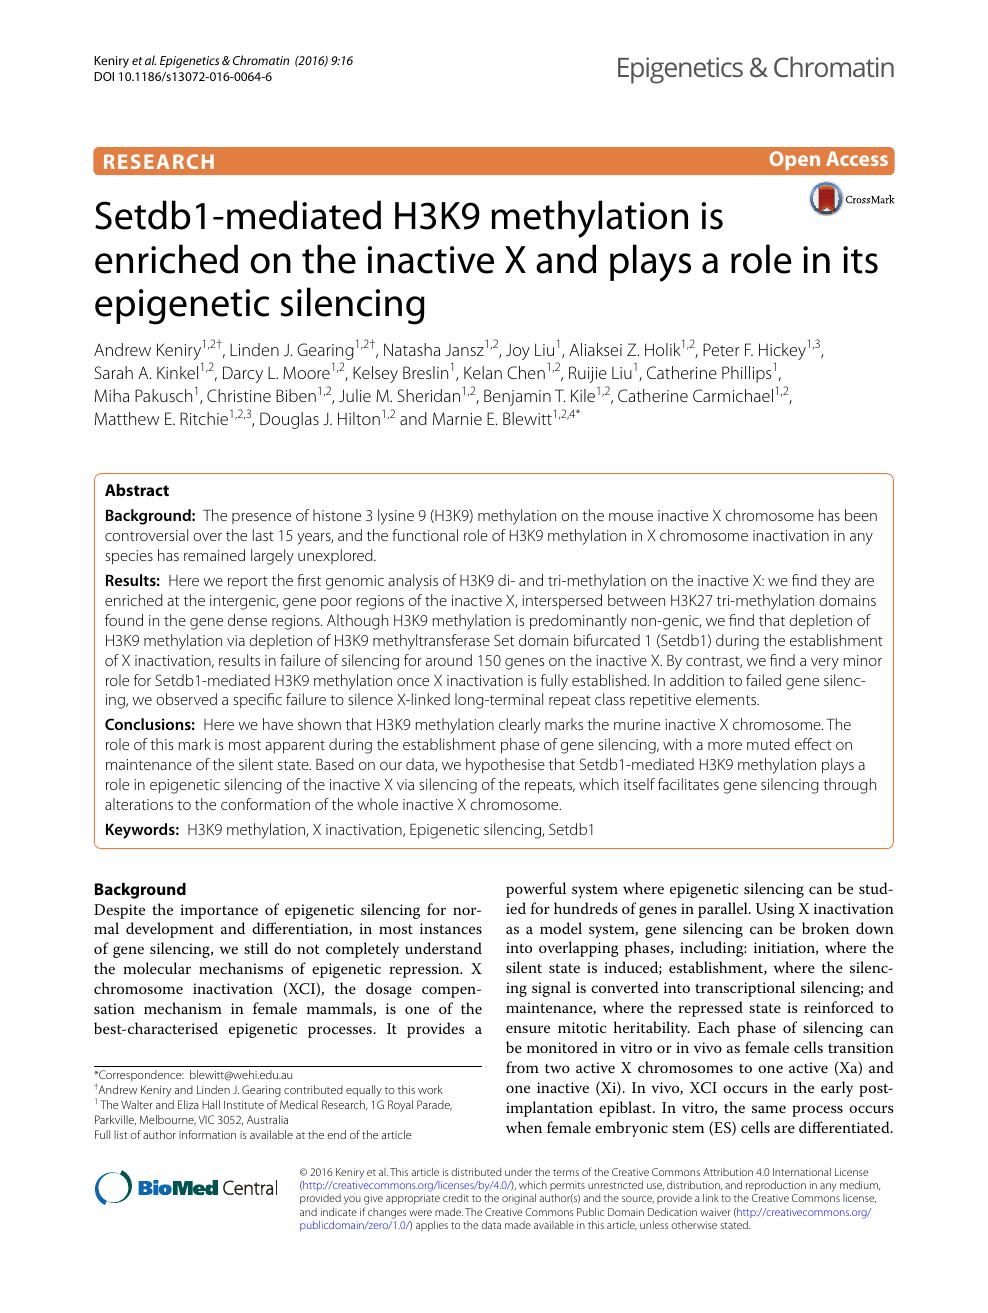 Setdb1 Mediated H3k9 Methylation Is Enriched On The Inactive X And Plays A Role In Its Epigenetic Silencing Topic Of Research Paper In Biological Sciences Download Scholarly Article Pdf And Read For